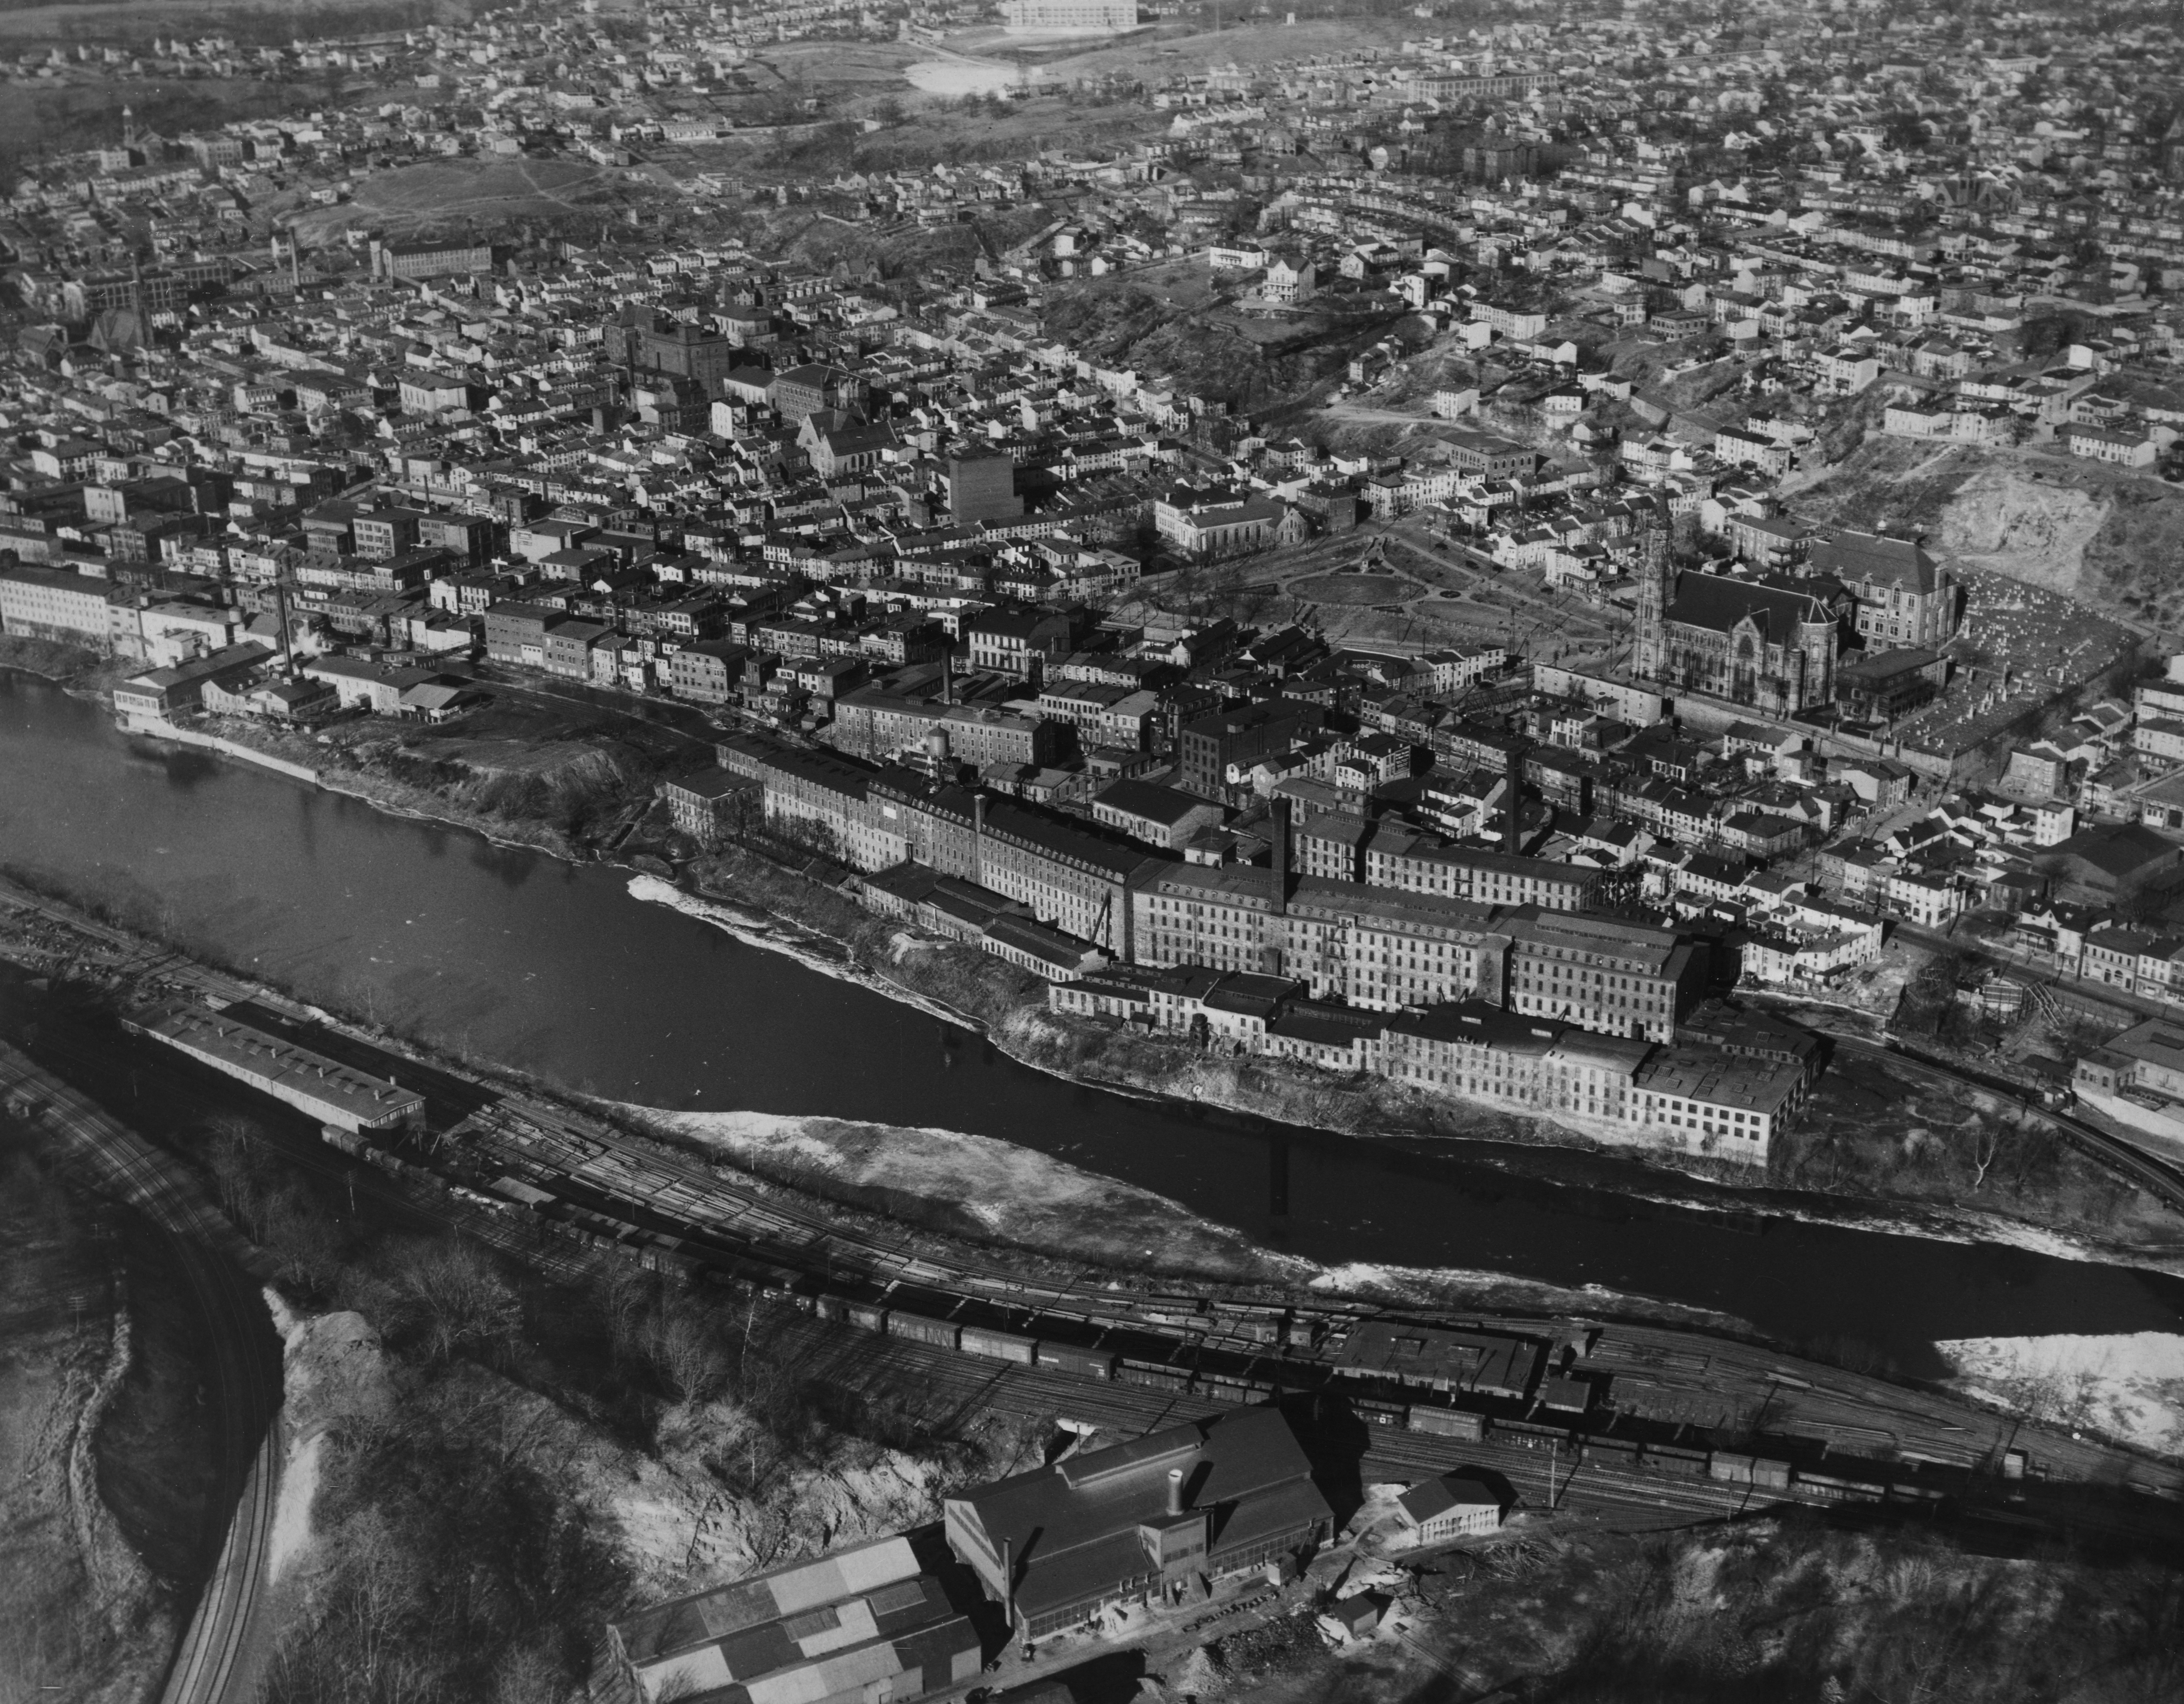 Schuylkill River, Manayunk, December 1926 | (Image 7050) Aero Service Corp., courtesy of Aerial Viewpoint, Spring, TX